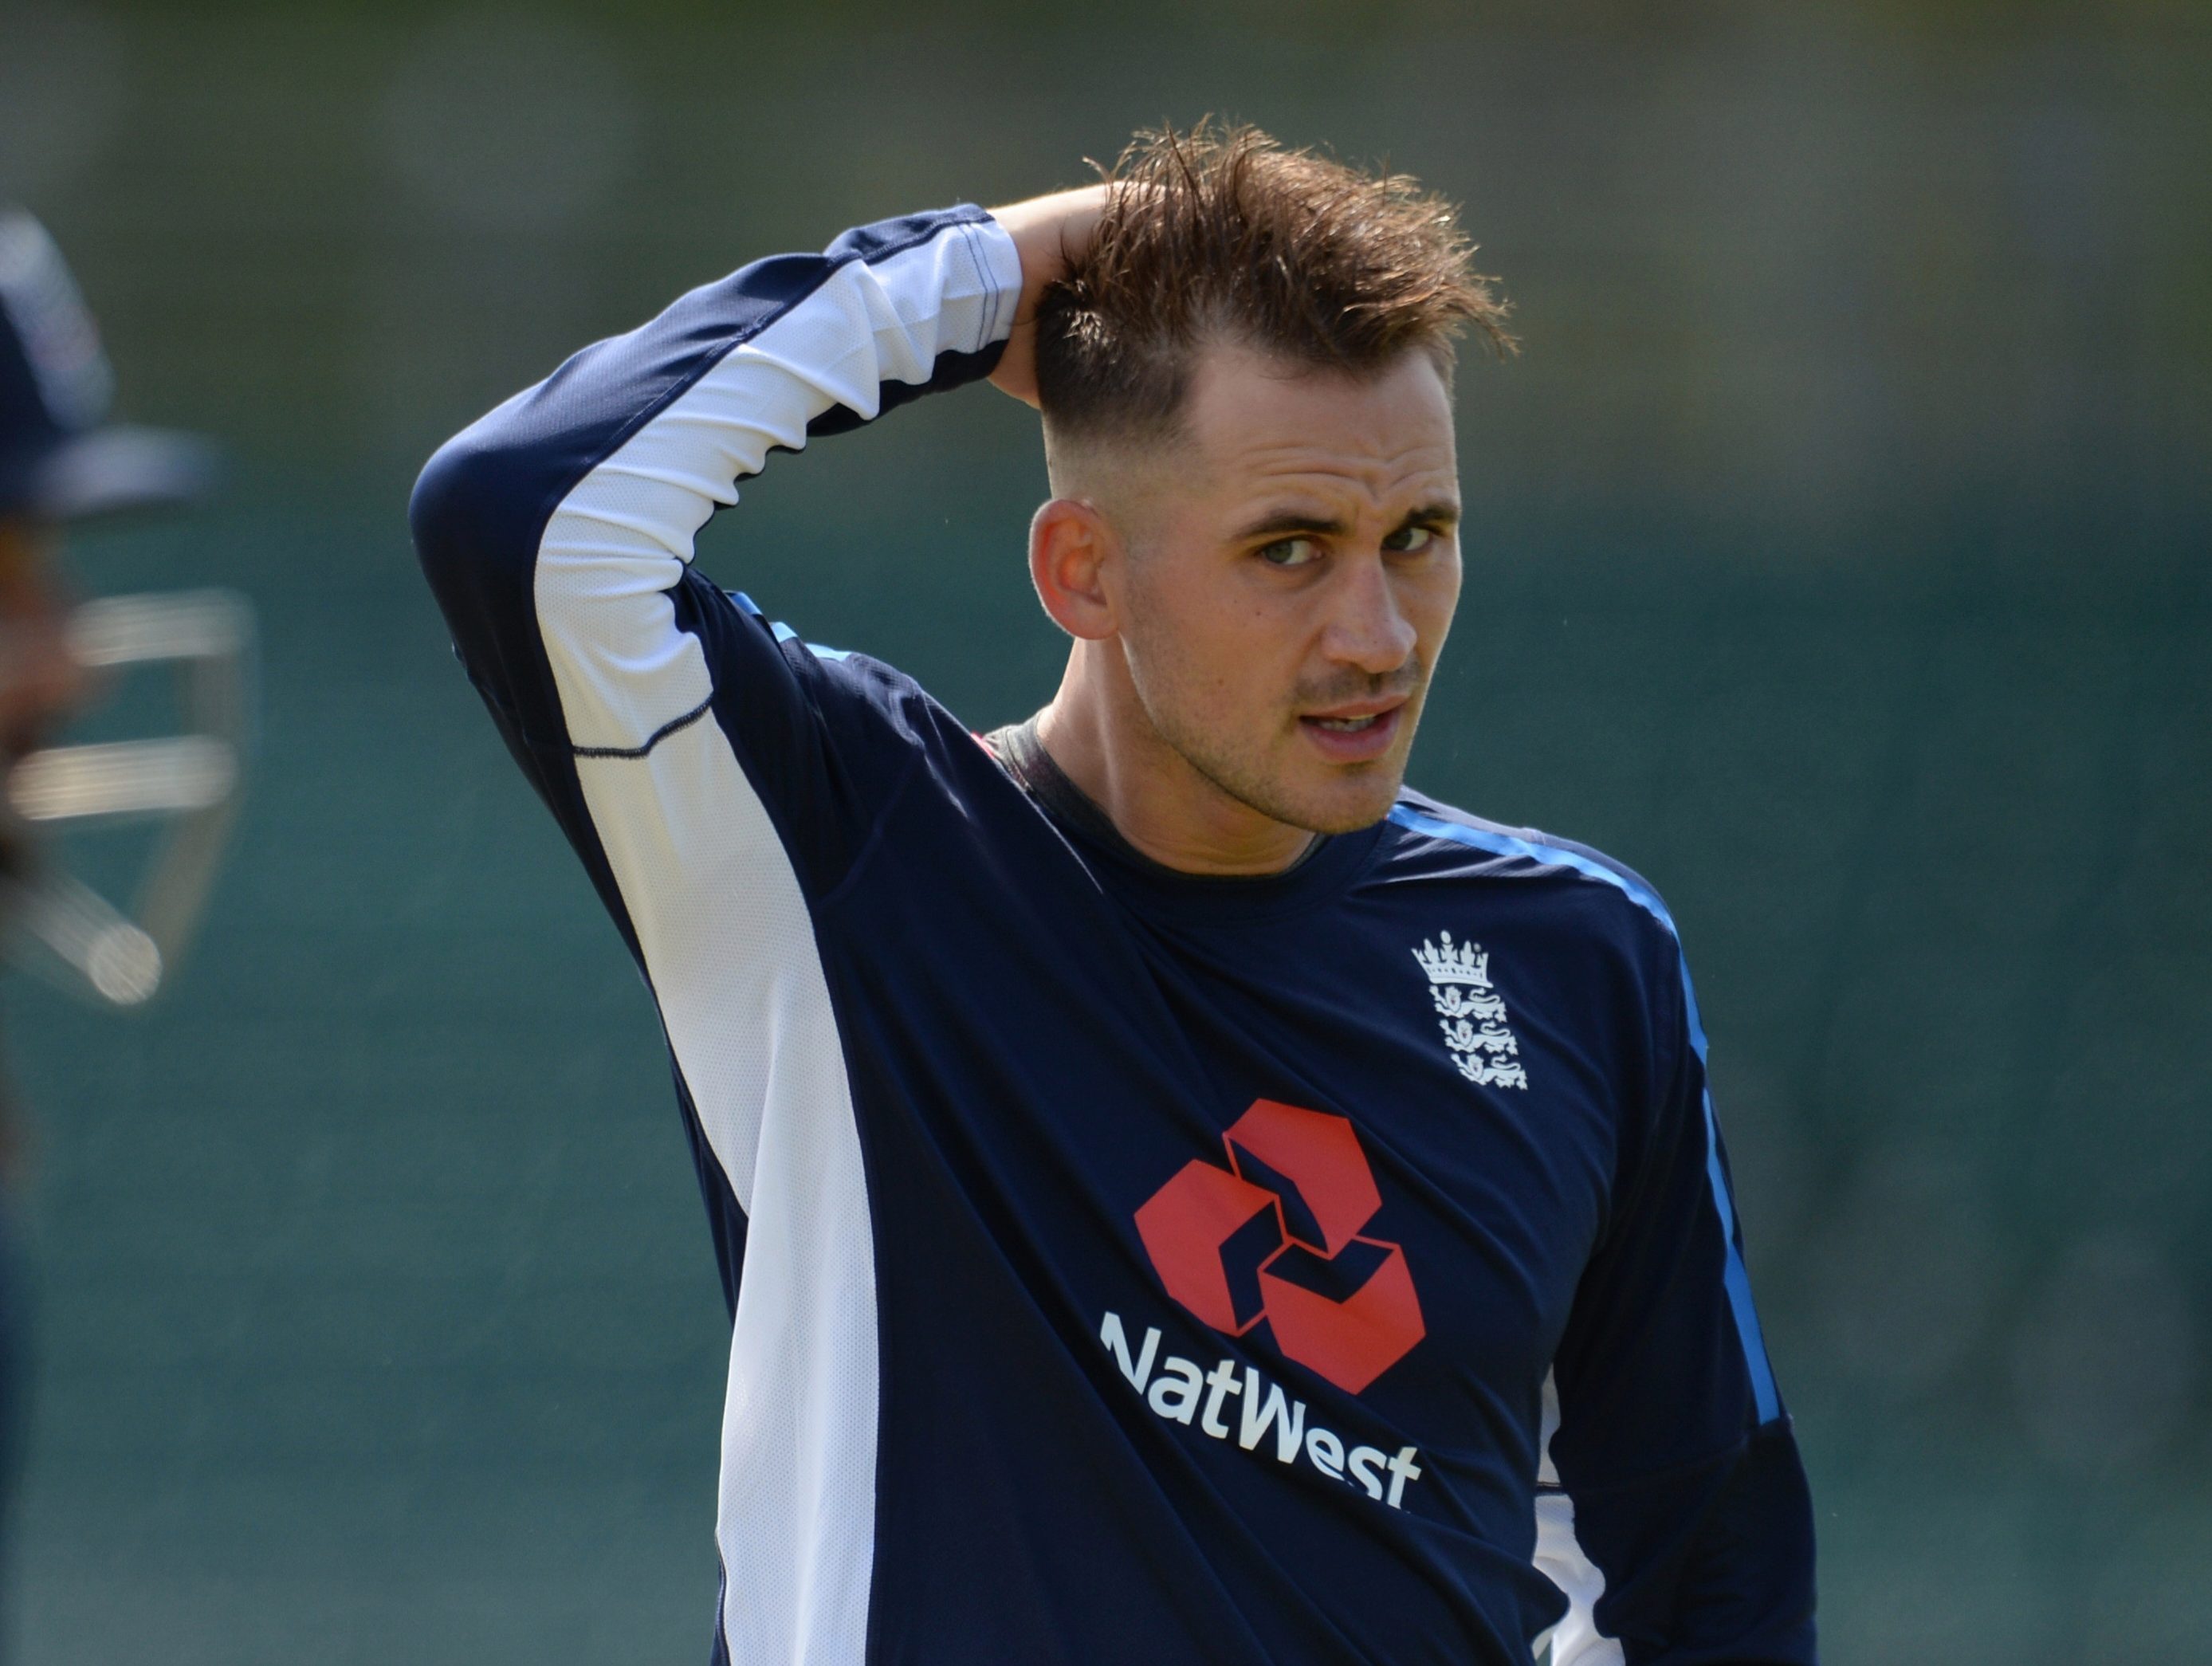 Alex Hales was removed from England 2019 WC squad for failing two recreational drug tests